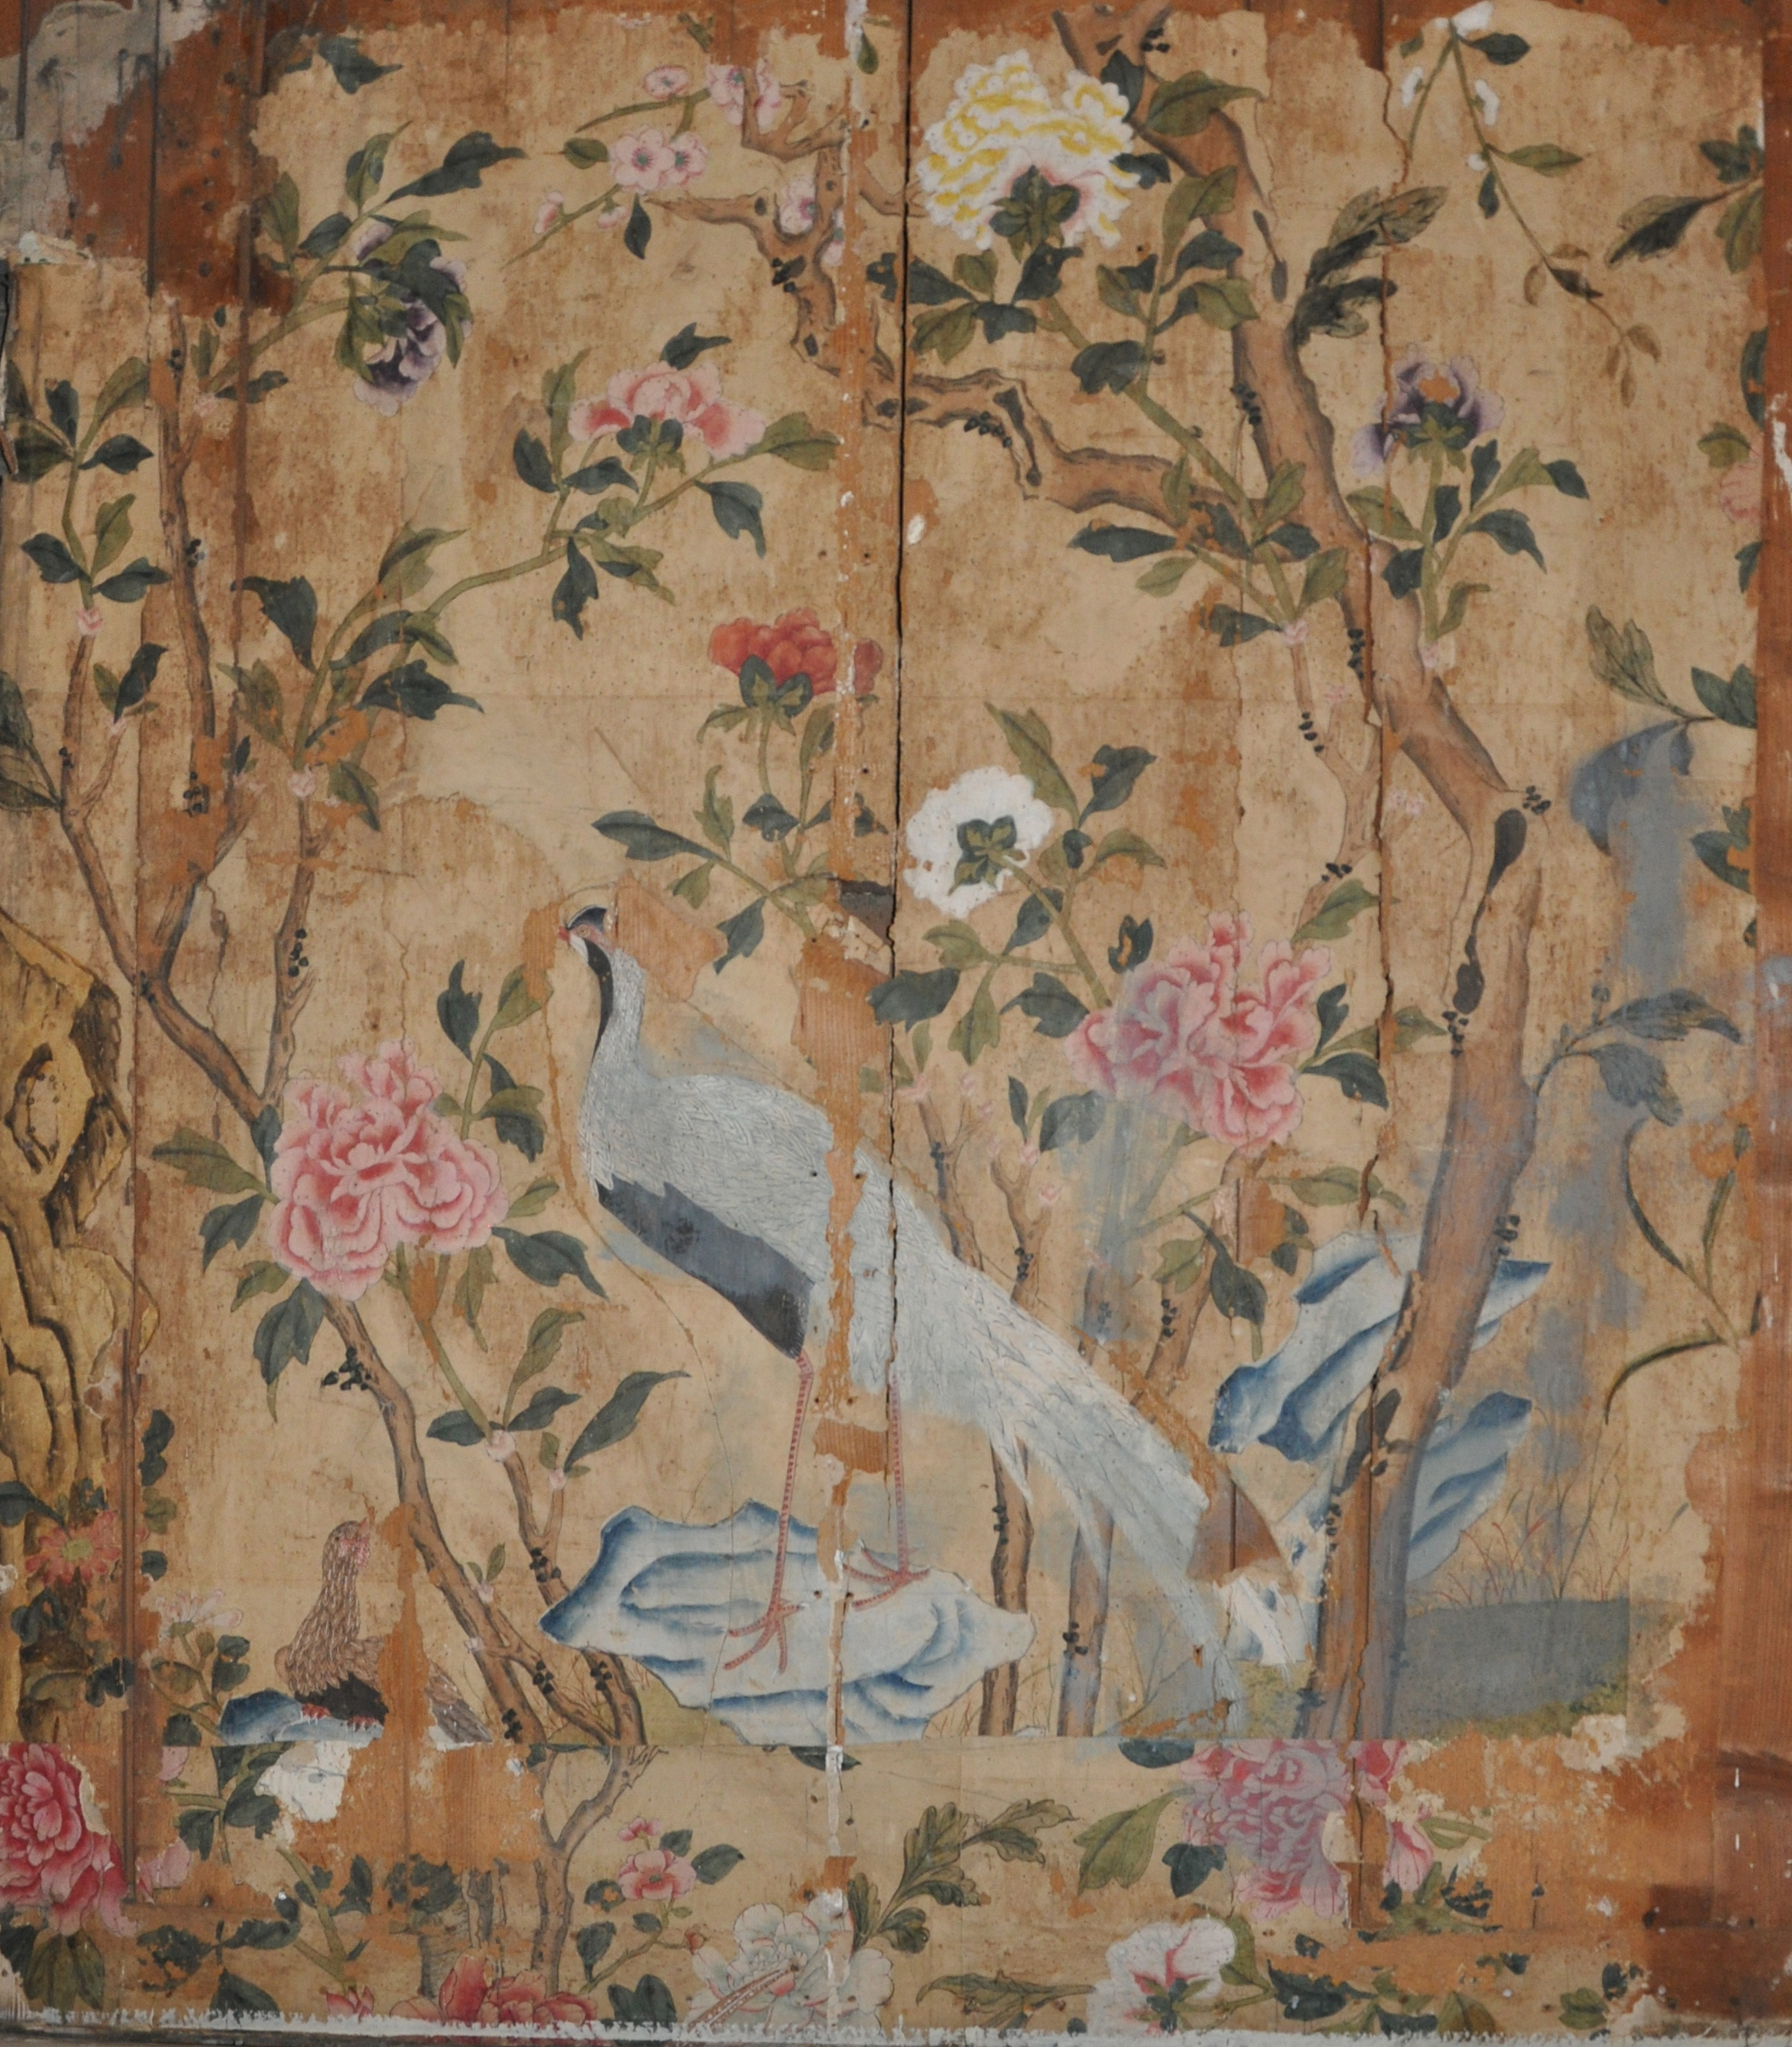 The History Blog Blog Archive 18th c. Chinese wallpaper found at Woburn Abbey